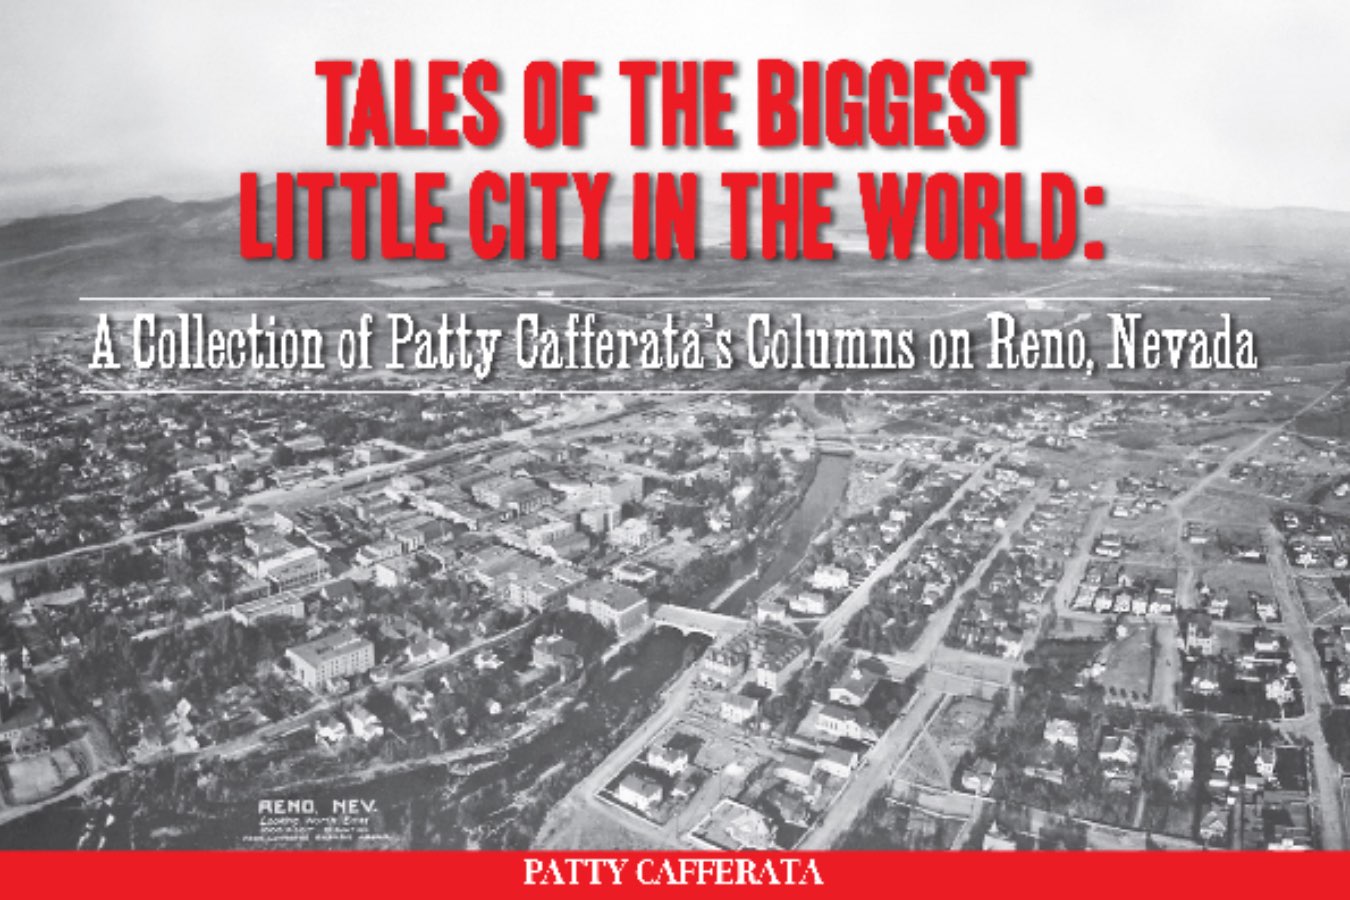 tales-of-the-biggest-little-city-in-the-world-a-collection-of-patty-cafferata-s-columns-on-reno-nevada-volume-i Image